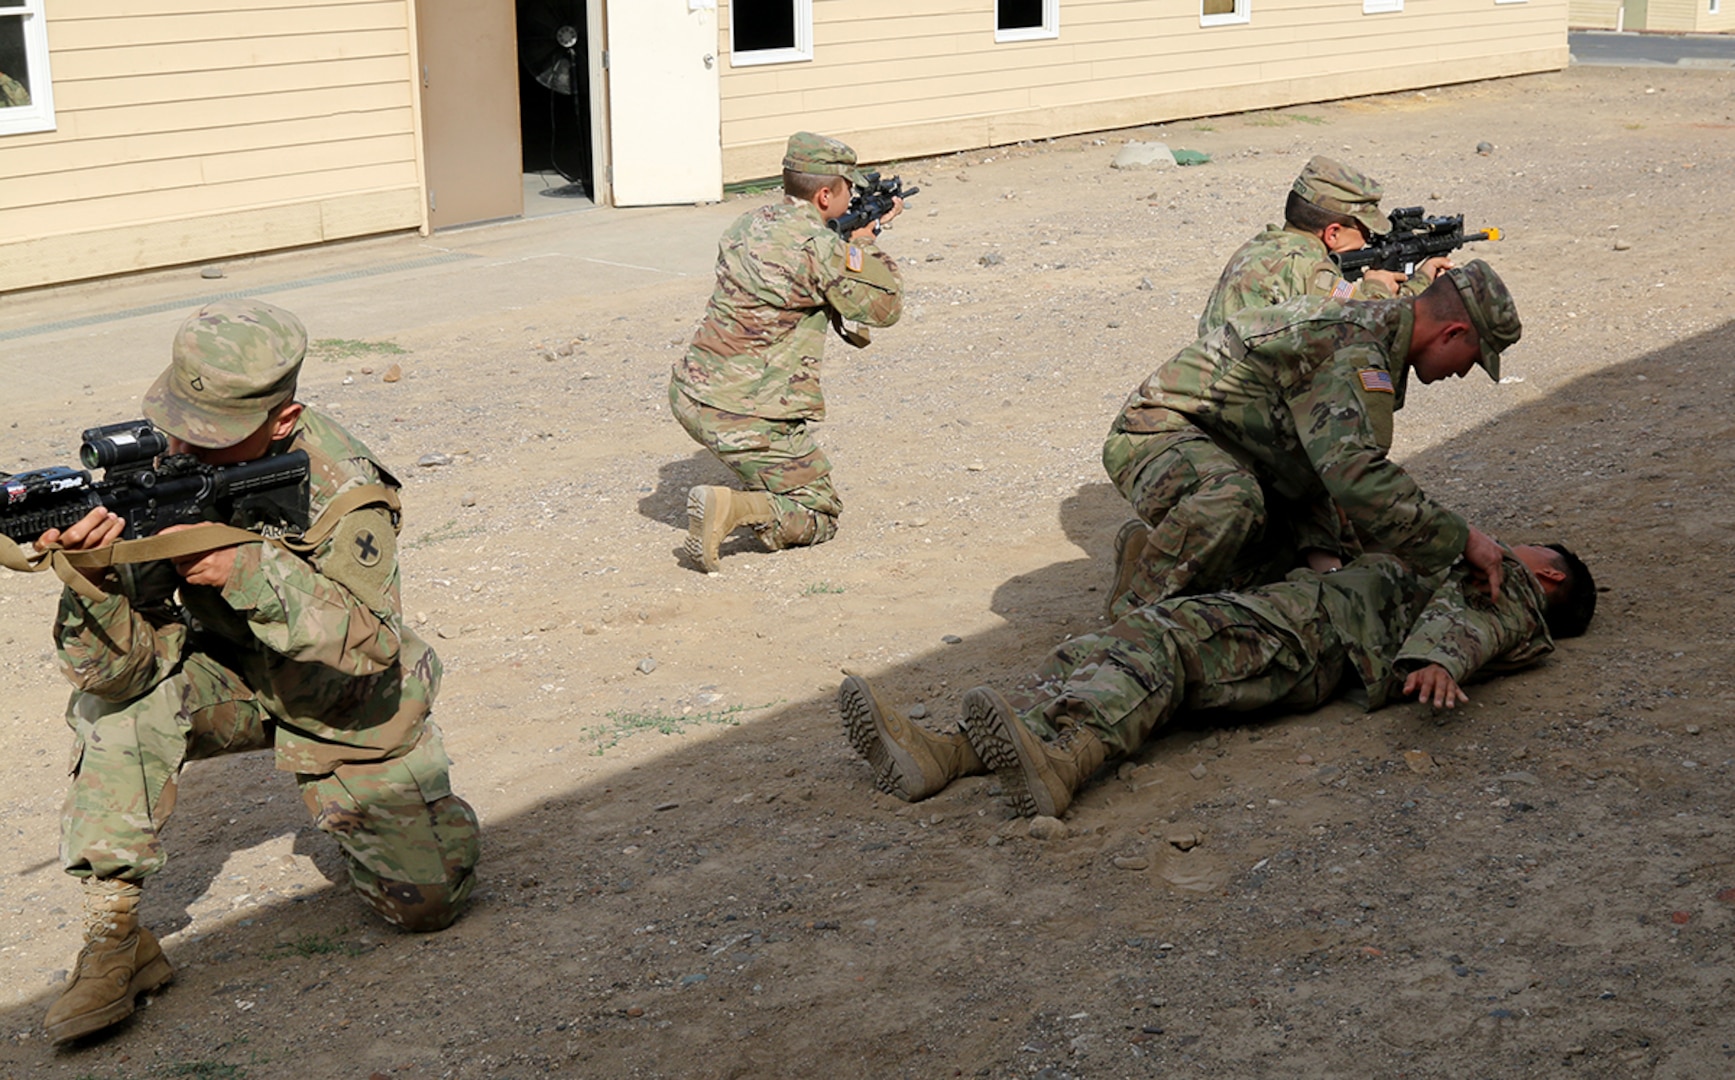 Pfc. Taylor Reed (left), joined by fellow Guardsmen with the 2nd Battalion, 130th Infantry Regiment, Illinois Army National Guard, participate in Combat Life Saver drills during Rising Thunder 19, Sept. 3, 2019 at the Yakima training Center in Yakima, Washington.